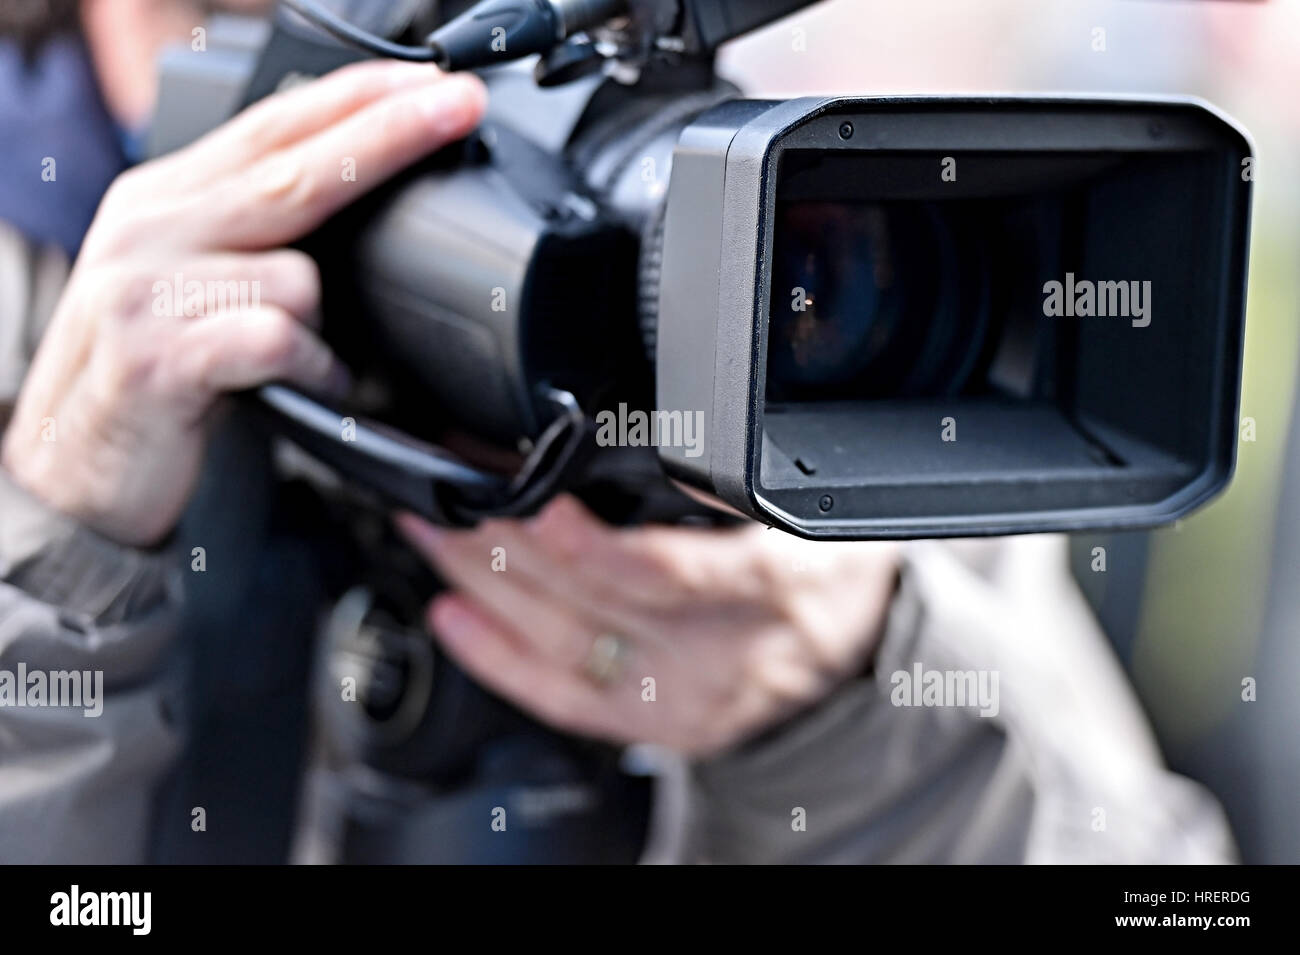 Lots of television cameras in a row broadcasting a live media event Stock Photo